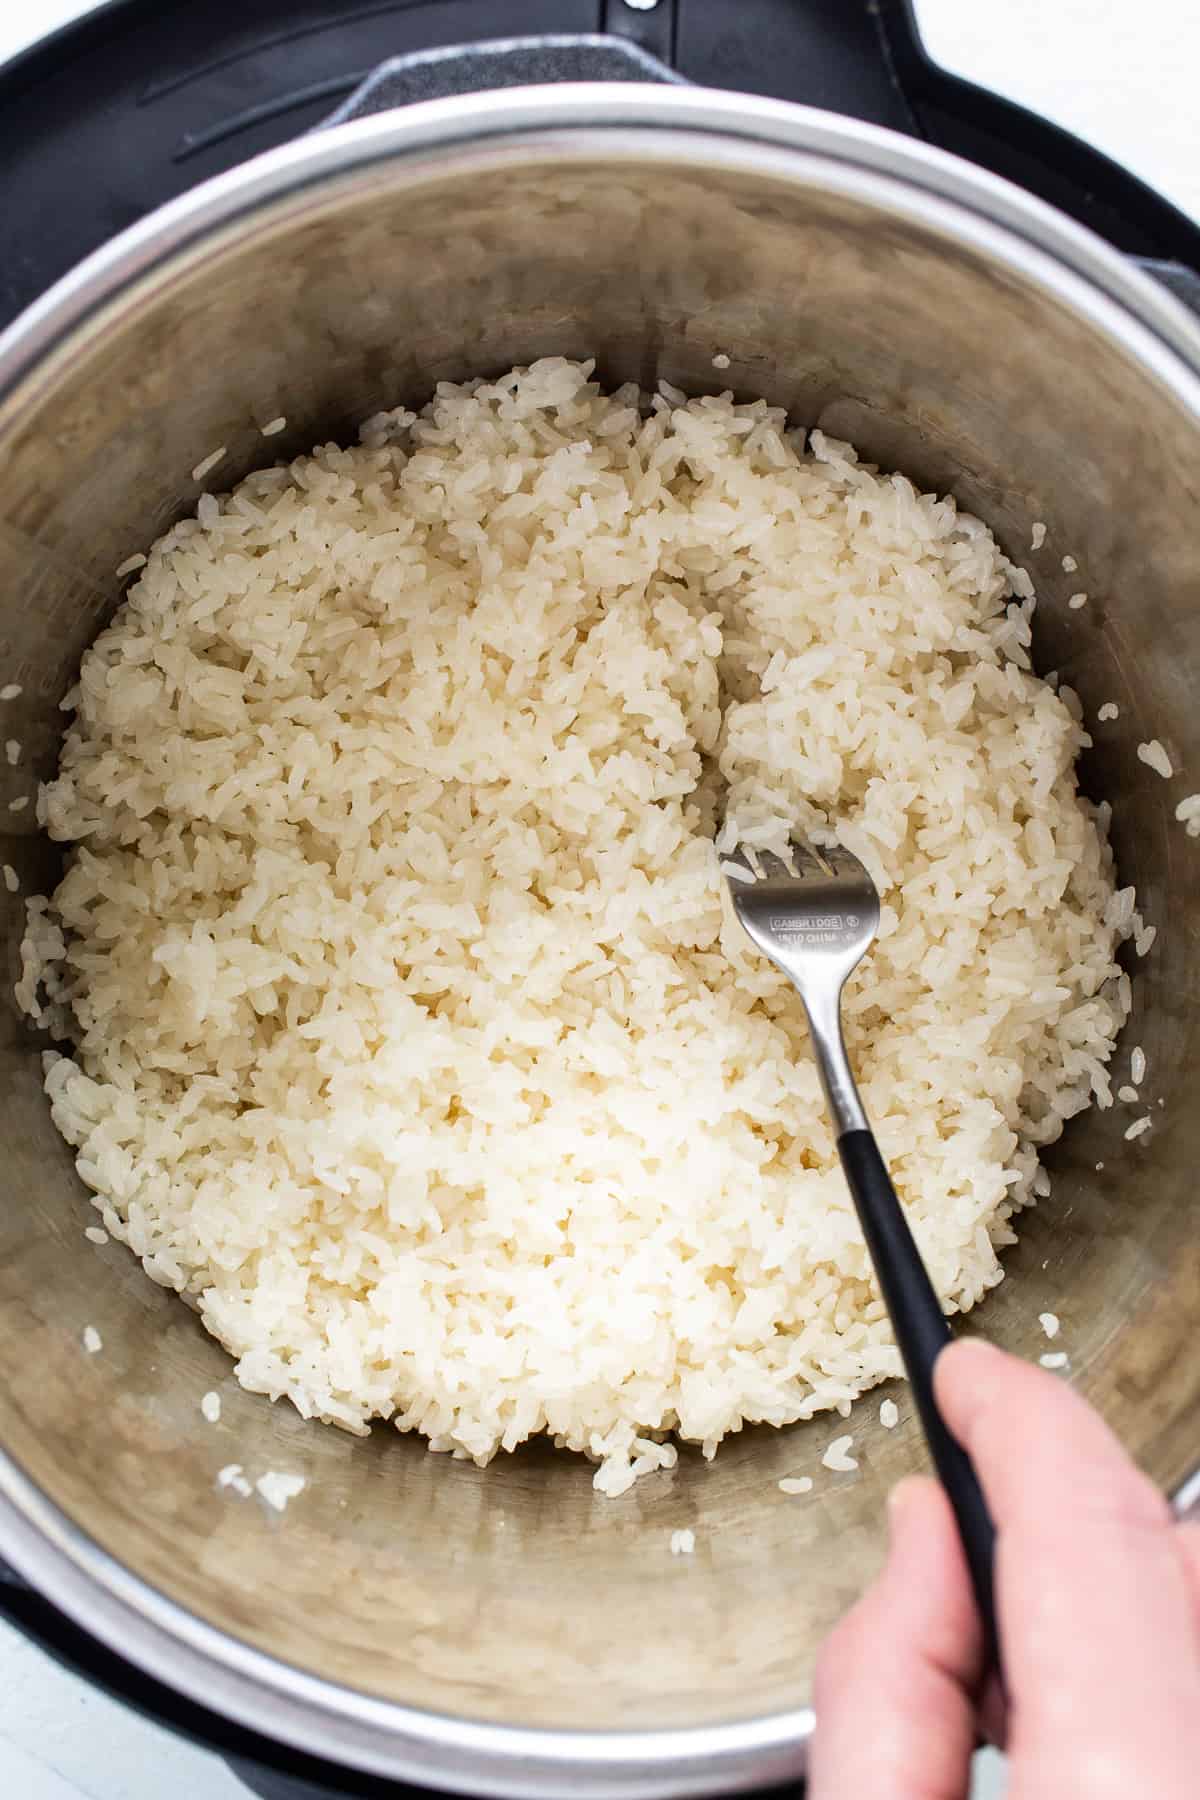 https://fitfoodiefinds.com/wp-content/uploads/2023/03/Instant-Pot-Sticky-Rice-4.jpg